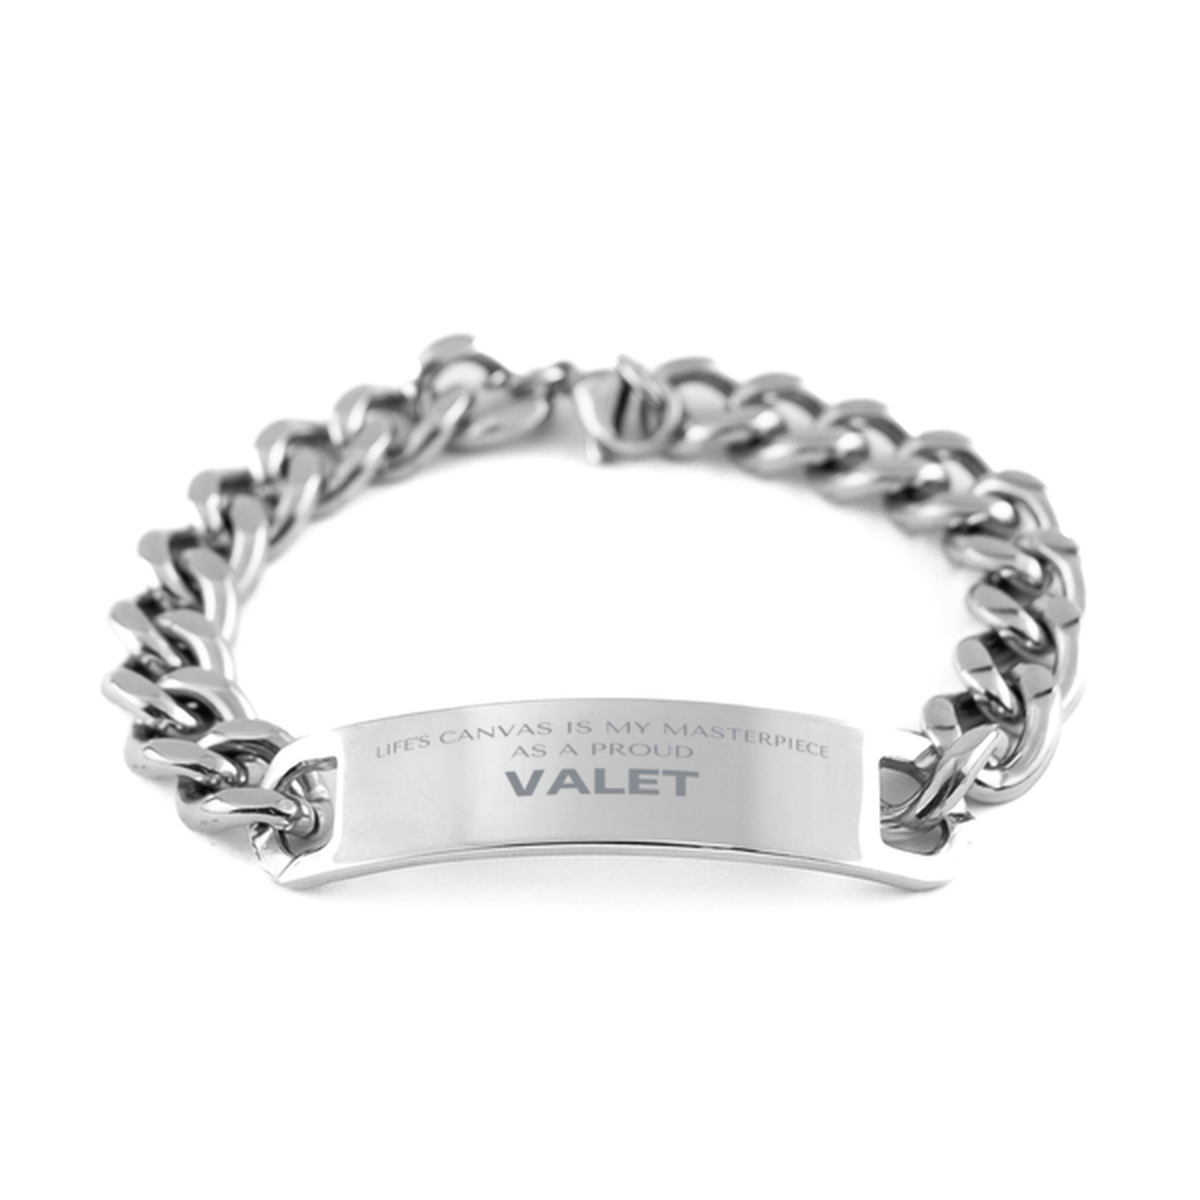 Proud Valet Gifts, Life's canvas is my masterpiece, Epic Birthday Christmas Unique Cuban Chain Stainless Steel Bracelet For Valet, Coworkers, Men, Women, Friends